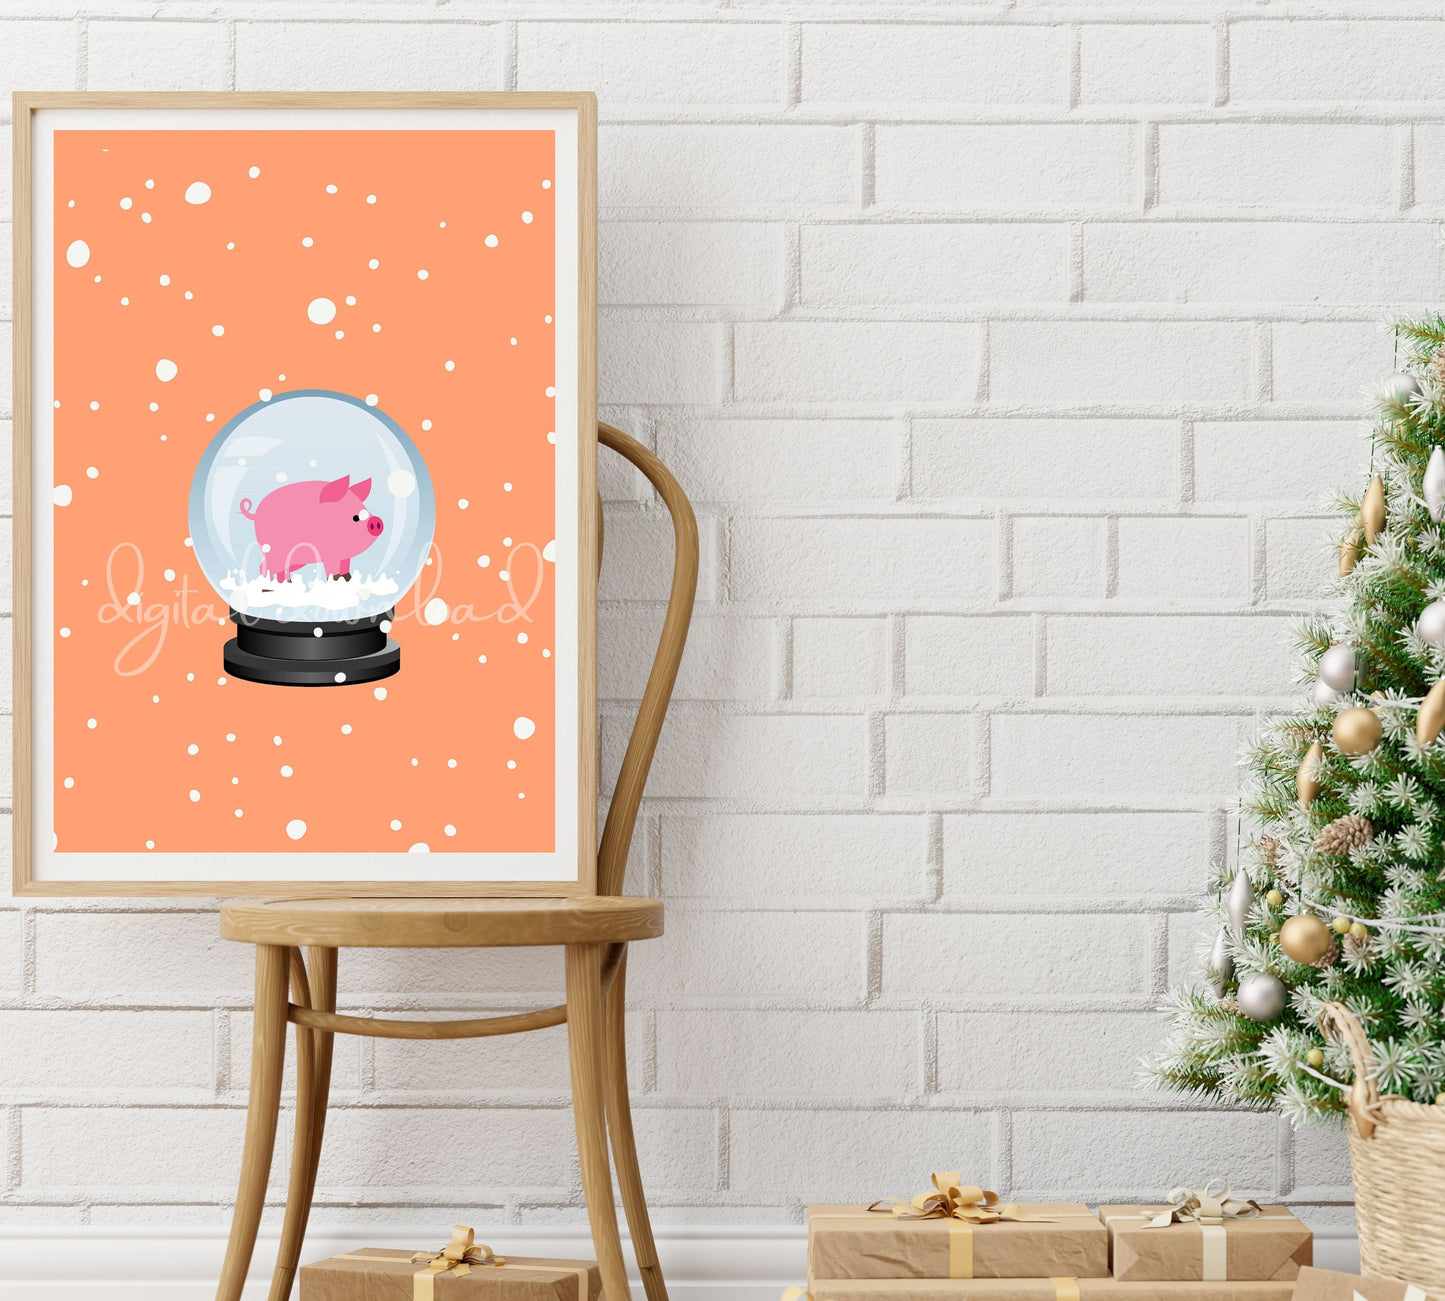 Christmas Printable Wall Art, Bedroom Art Print, Pig in Snow Globe, Living Room Print, Instant Download, Home Office Decor, Holiday Decor